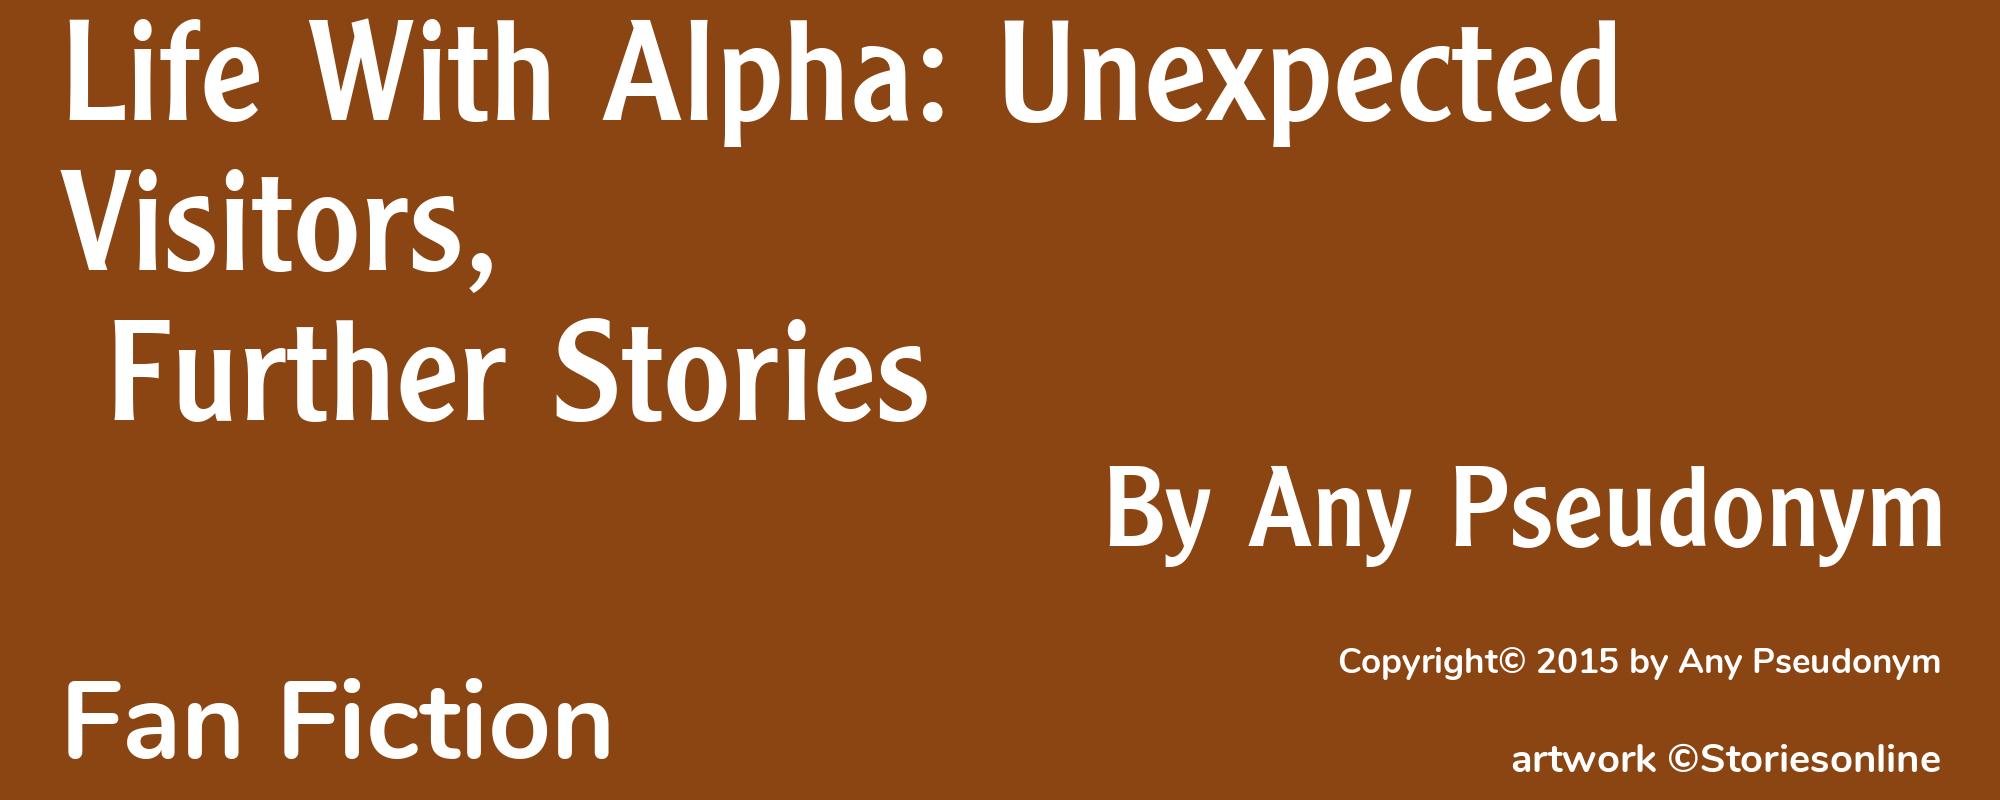 Life With Alpha: Unexpected Visitors, Further Stories - Cover